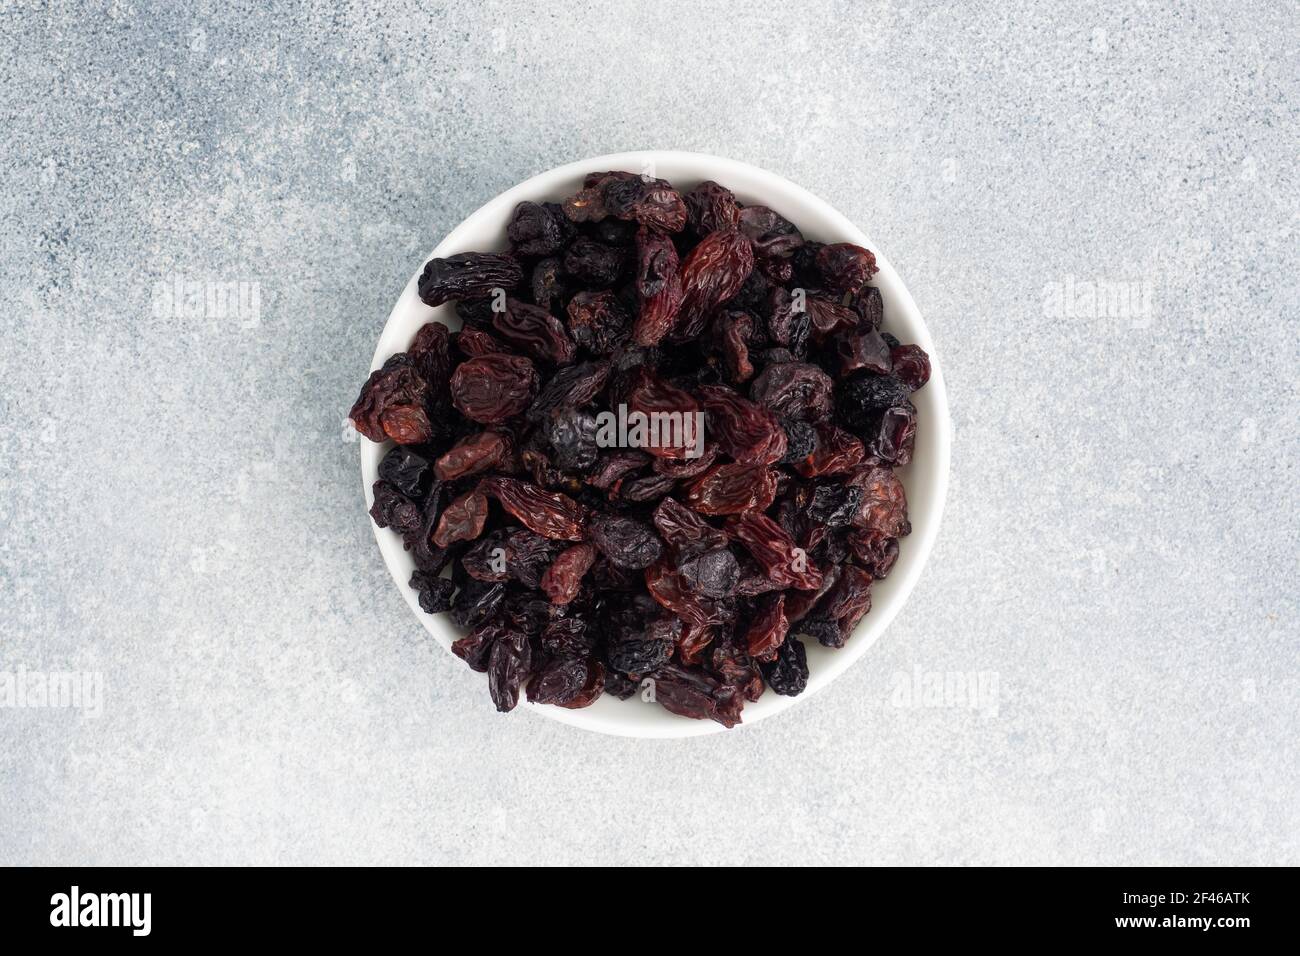 Dried raisins from dark grapes in a plate on a gray concrete background, copy space top view Stock Photo